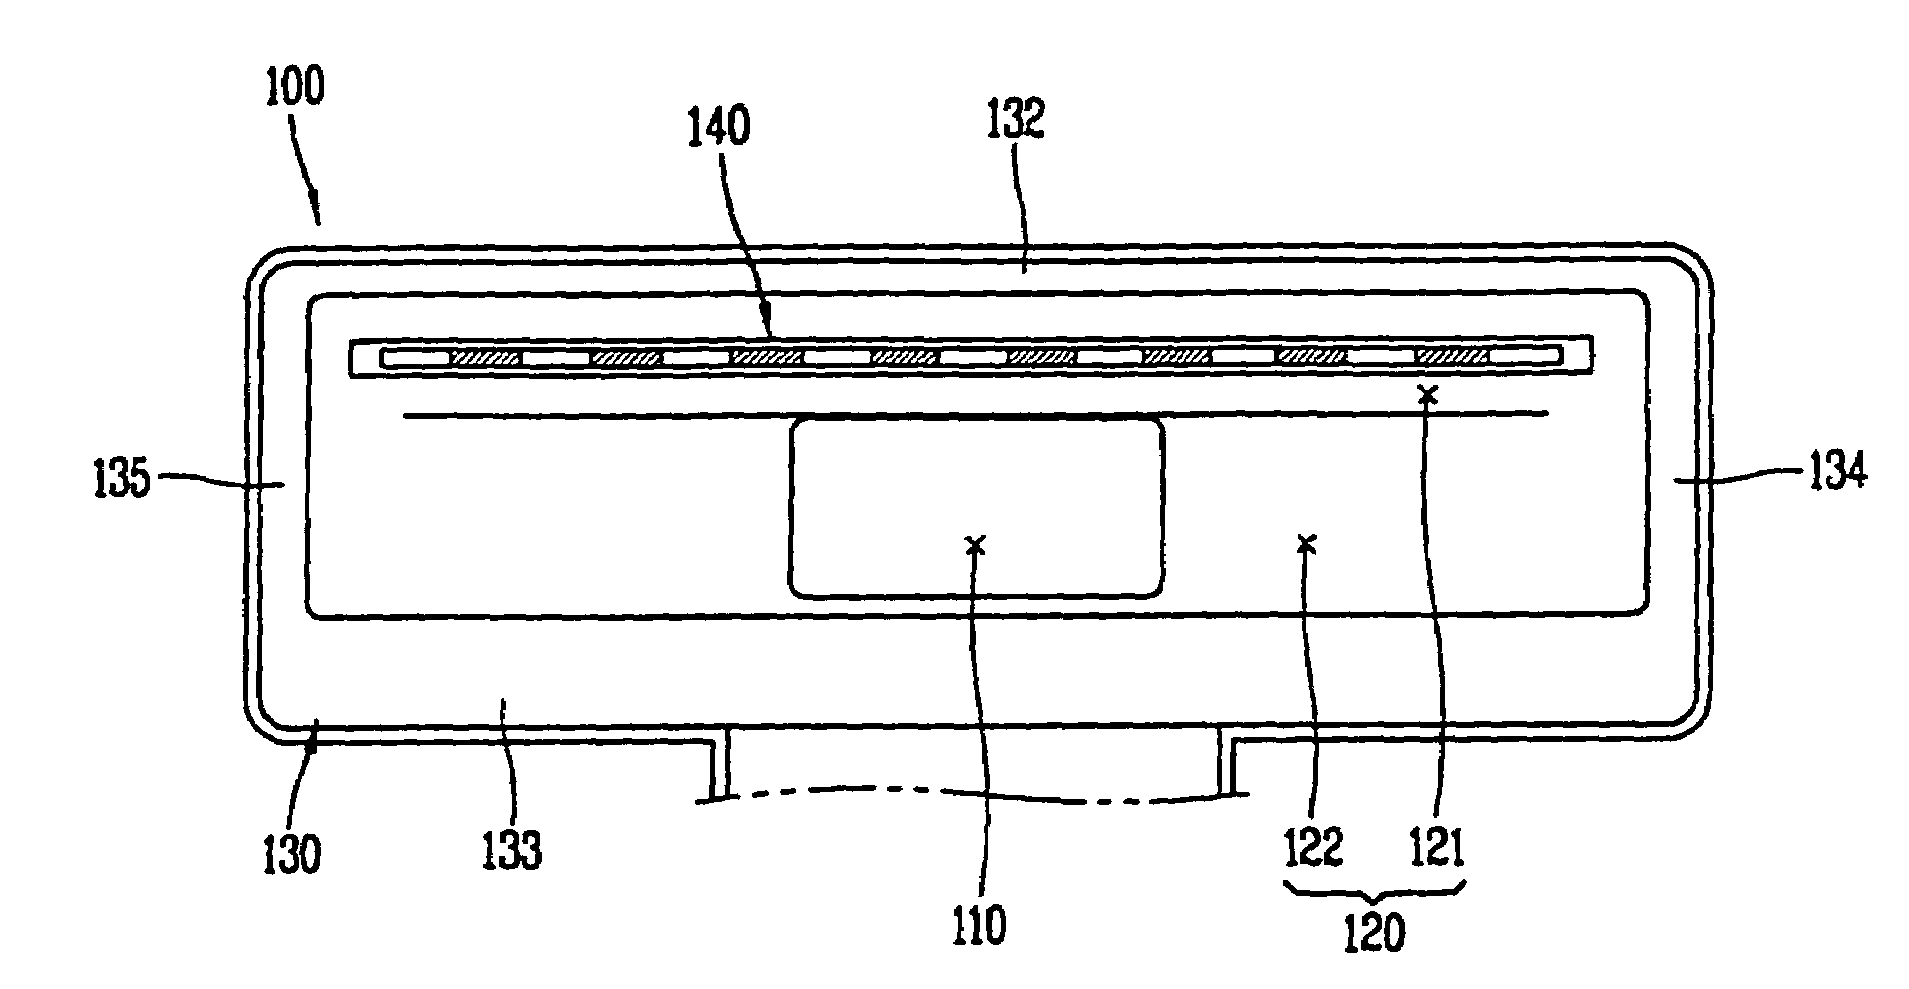 Suction nozzle and head of vacuum cleaner having the same